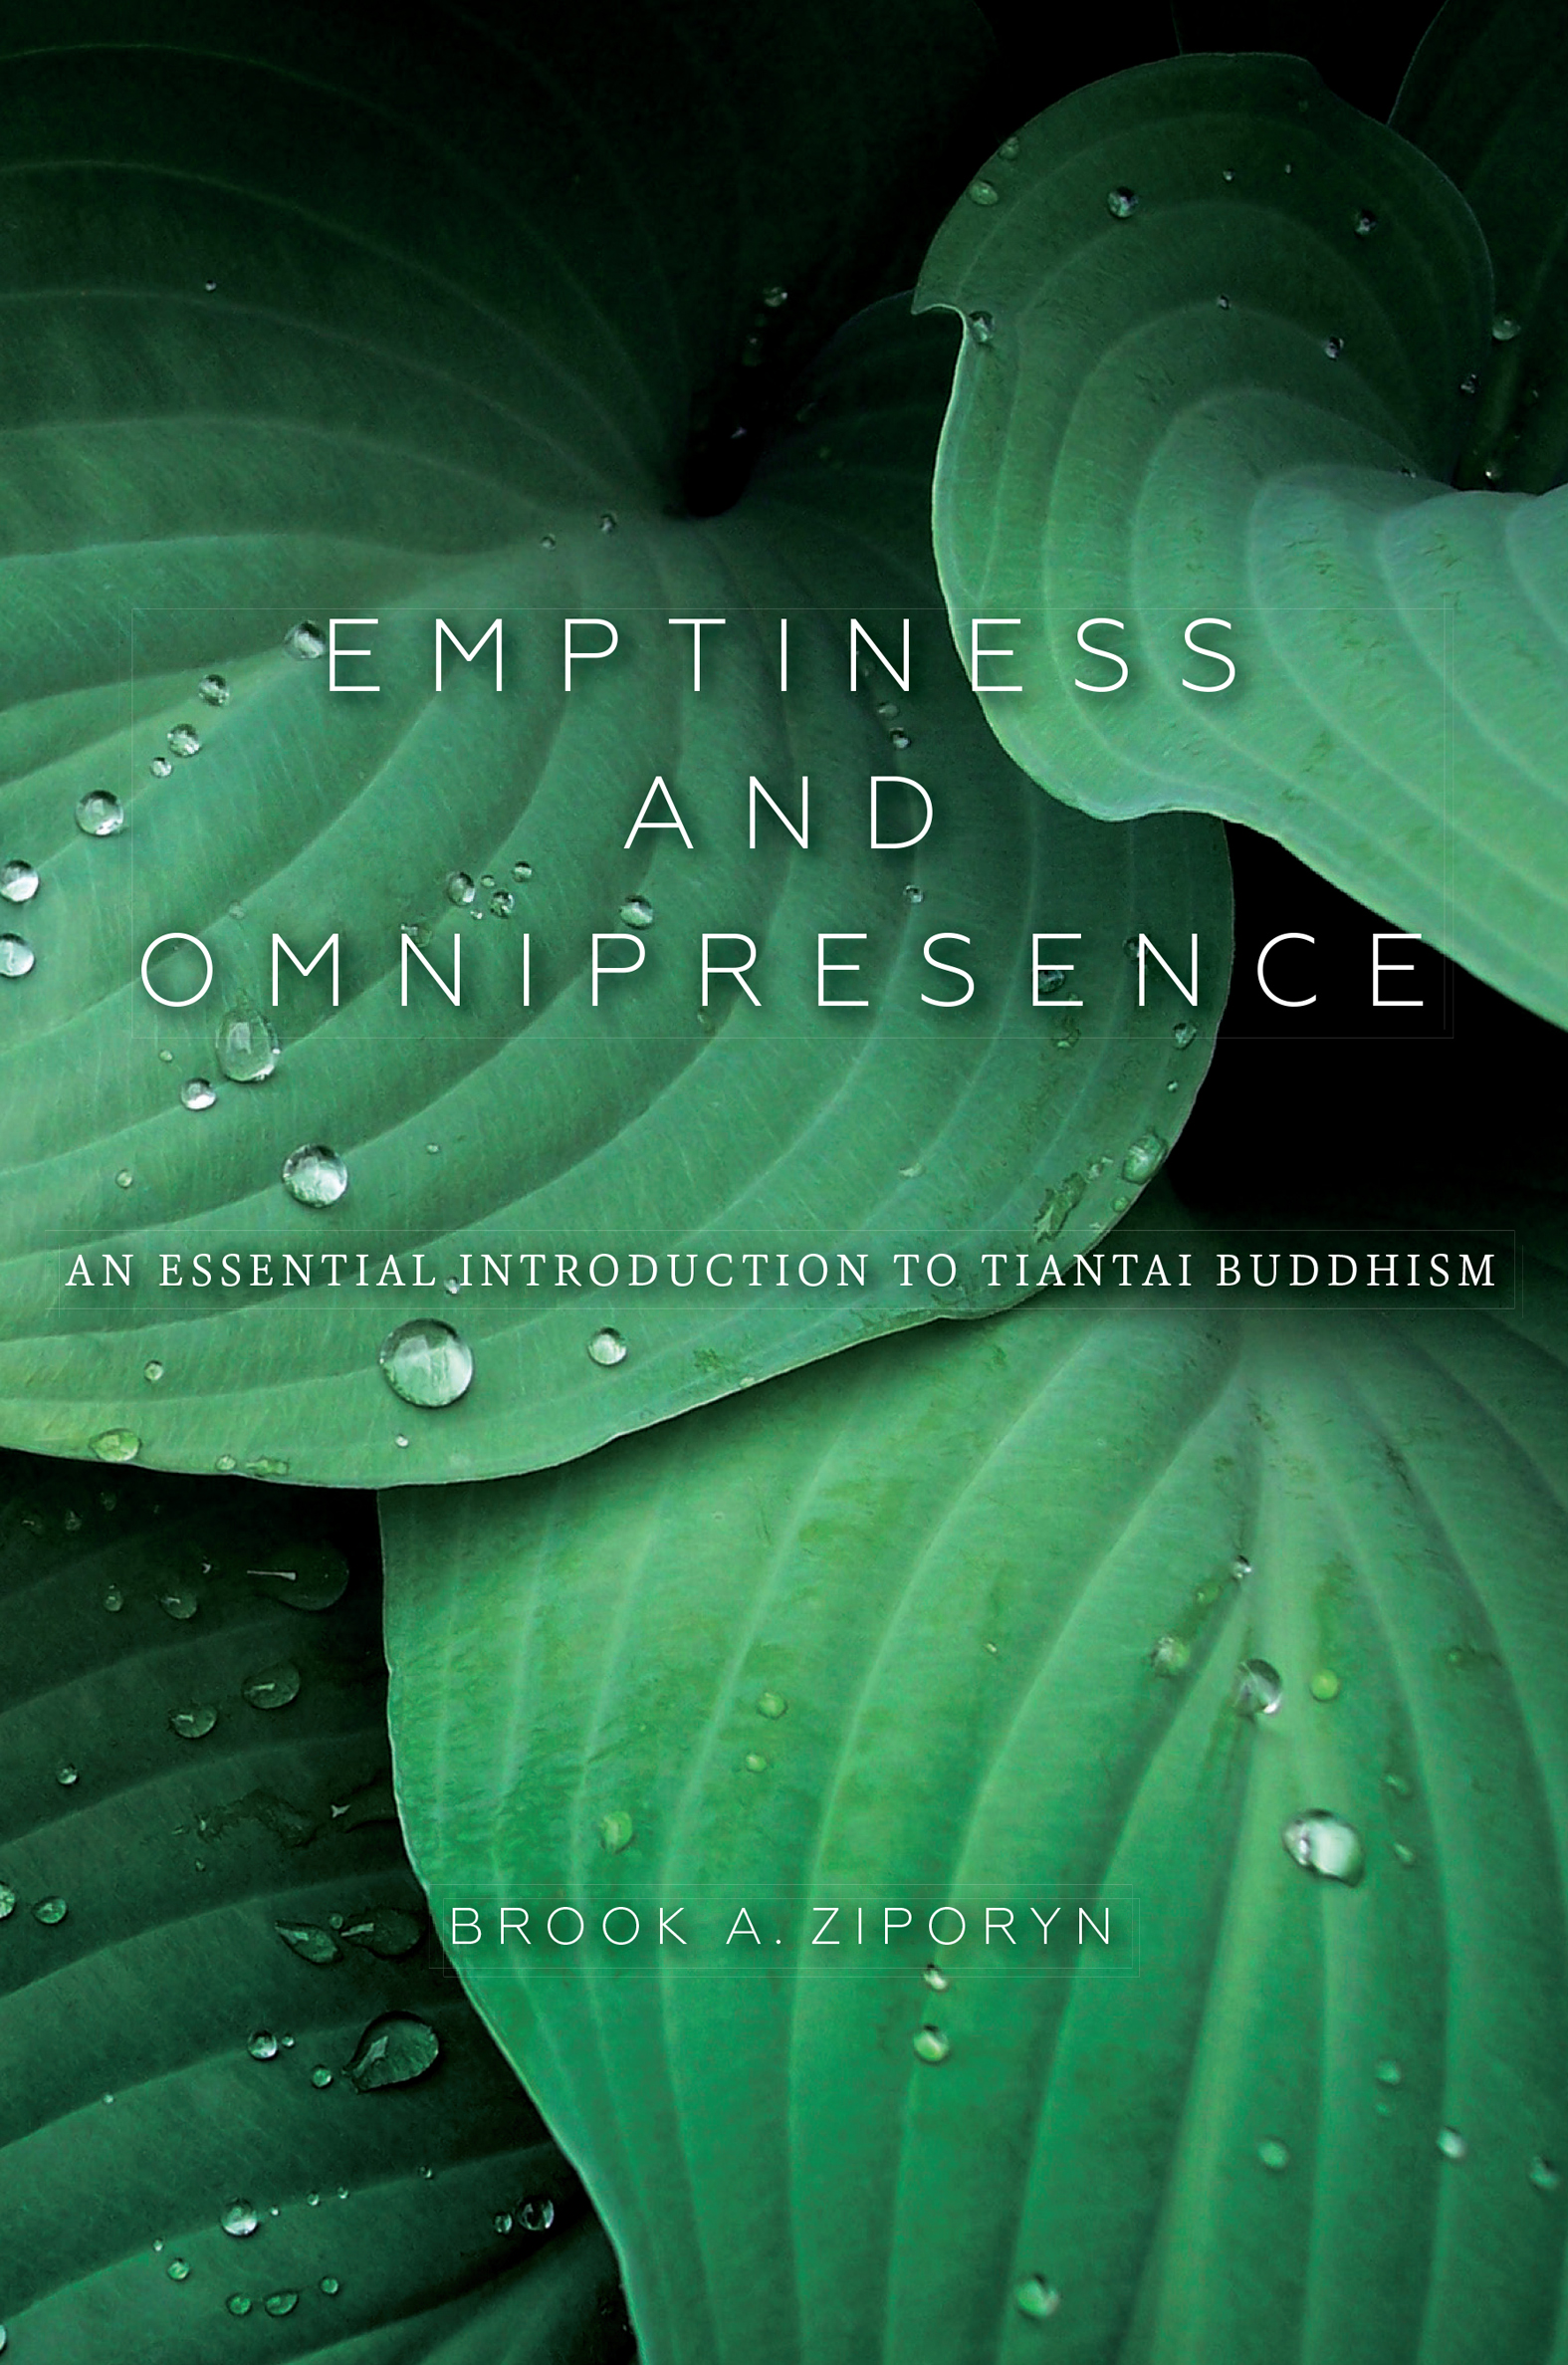 ISBN 9780253021205 product image for Emptiness and Omnipresence | upcitemdb.com